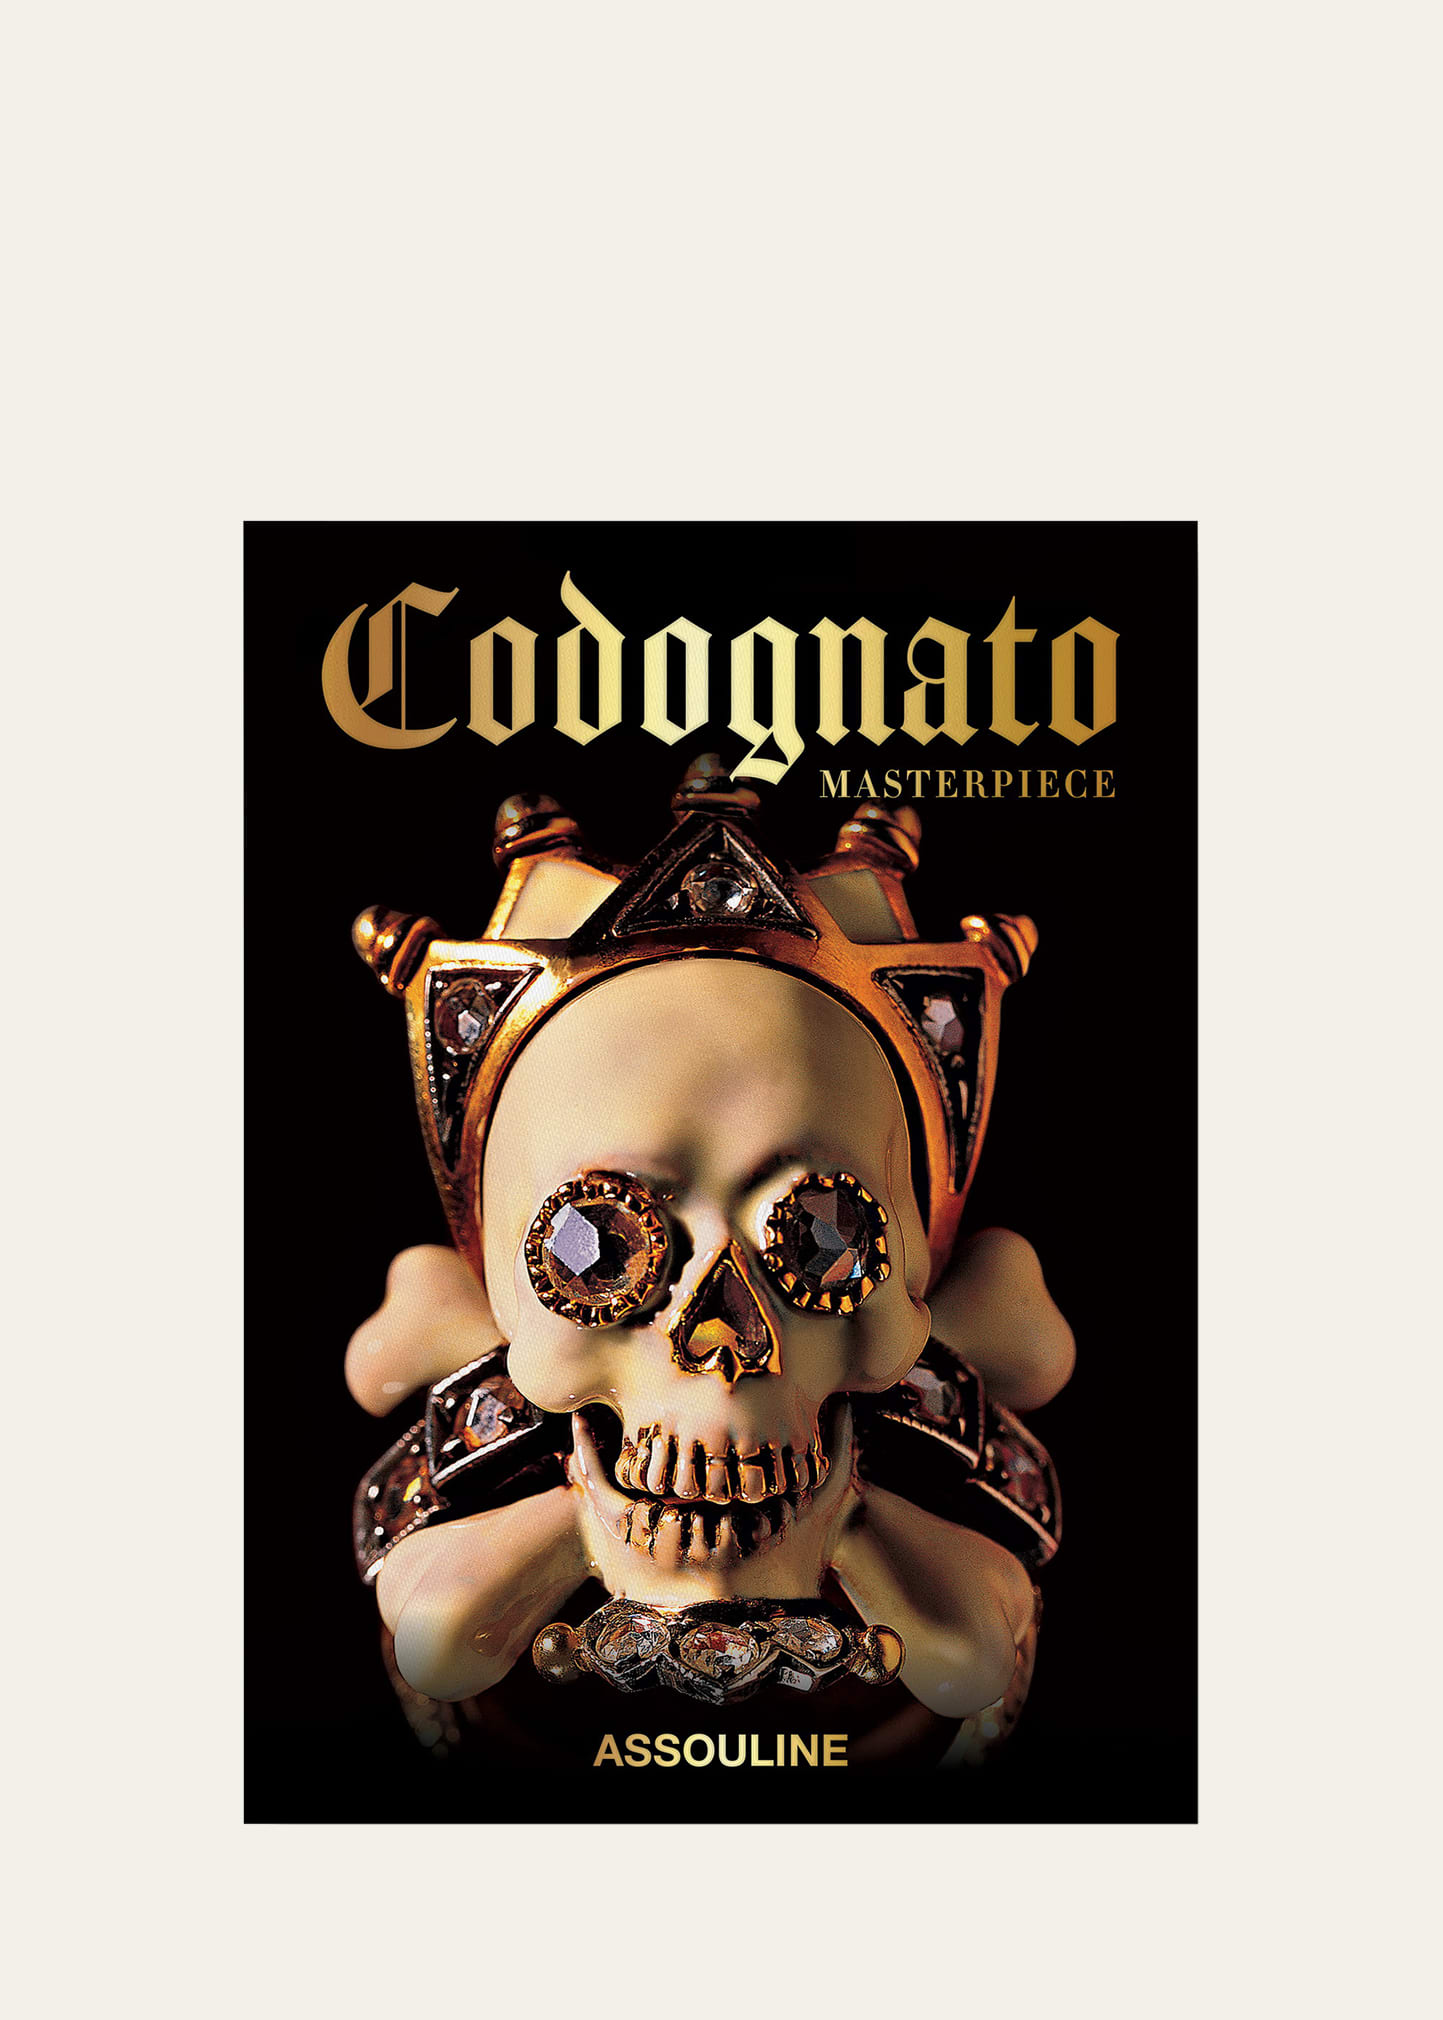 "Codognato Masterpiece" Book by William Middleton and Laurence Benaim